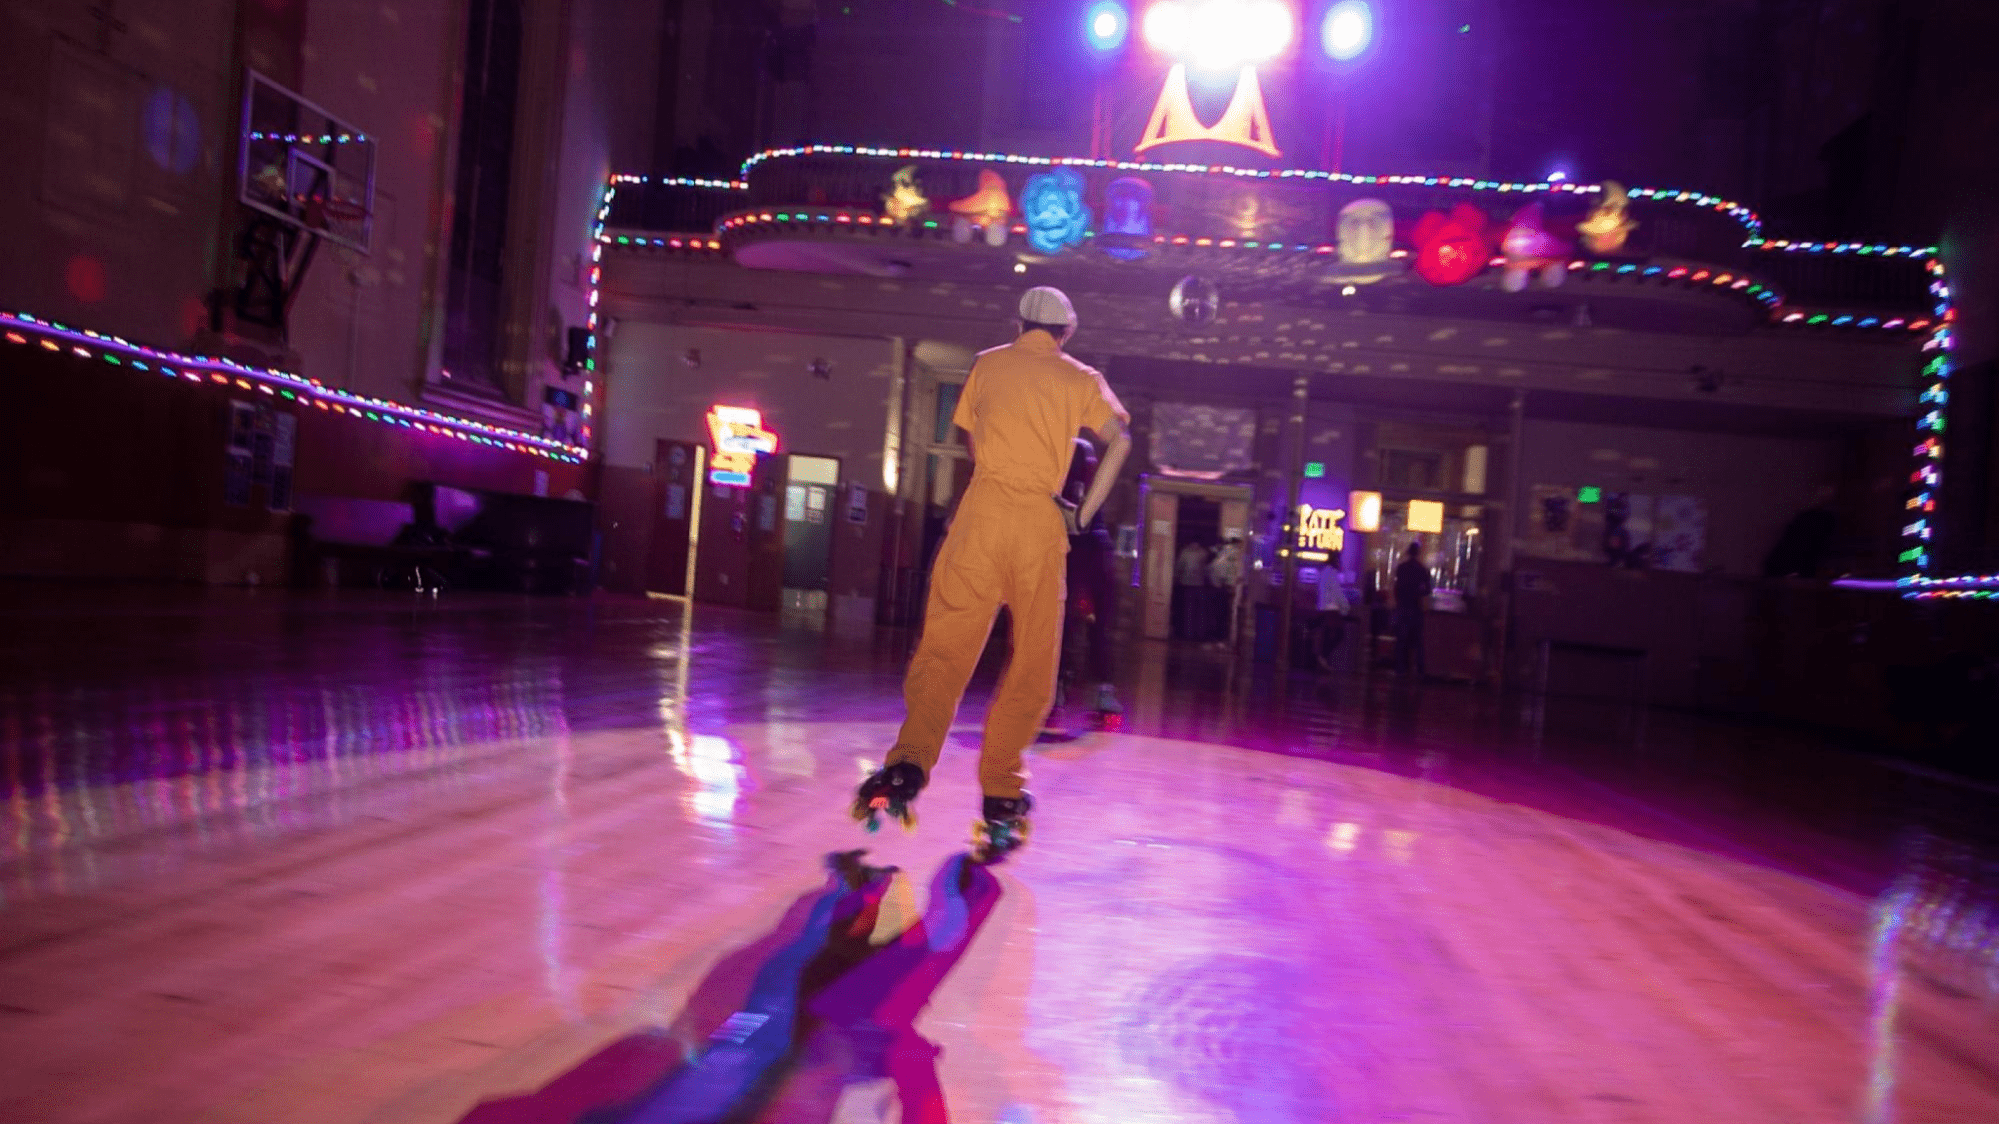 A person roller skating